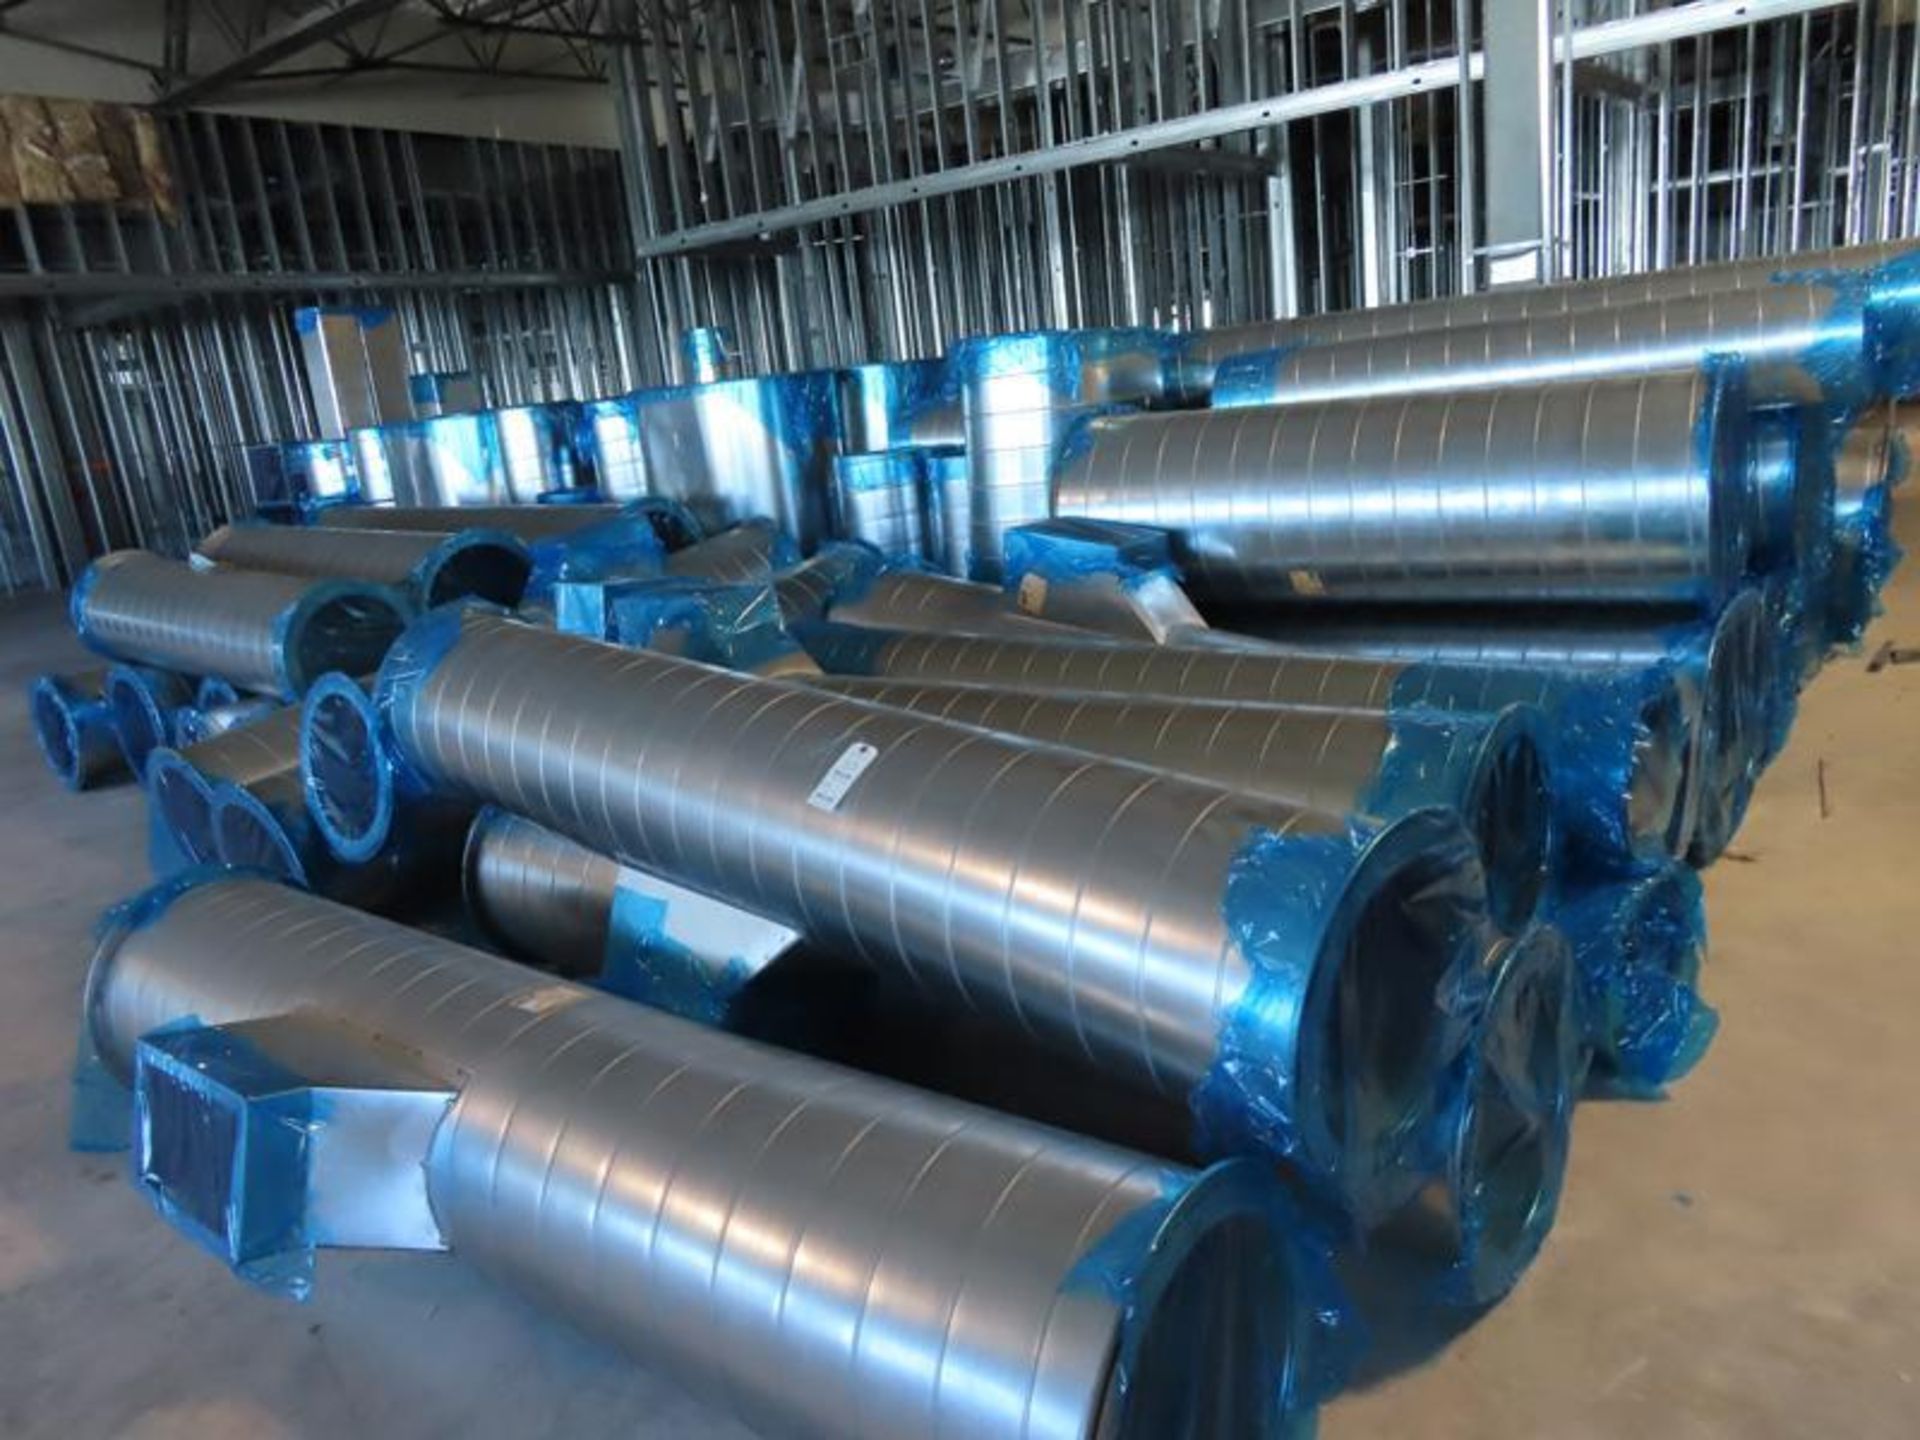 LARGE SELECTION OF HVAC DUCTING MATERIALS